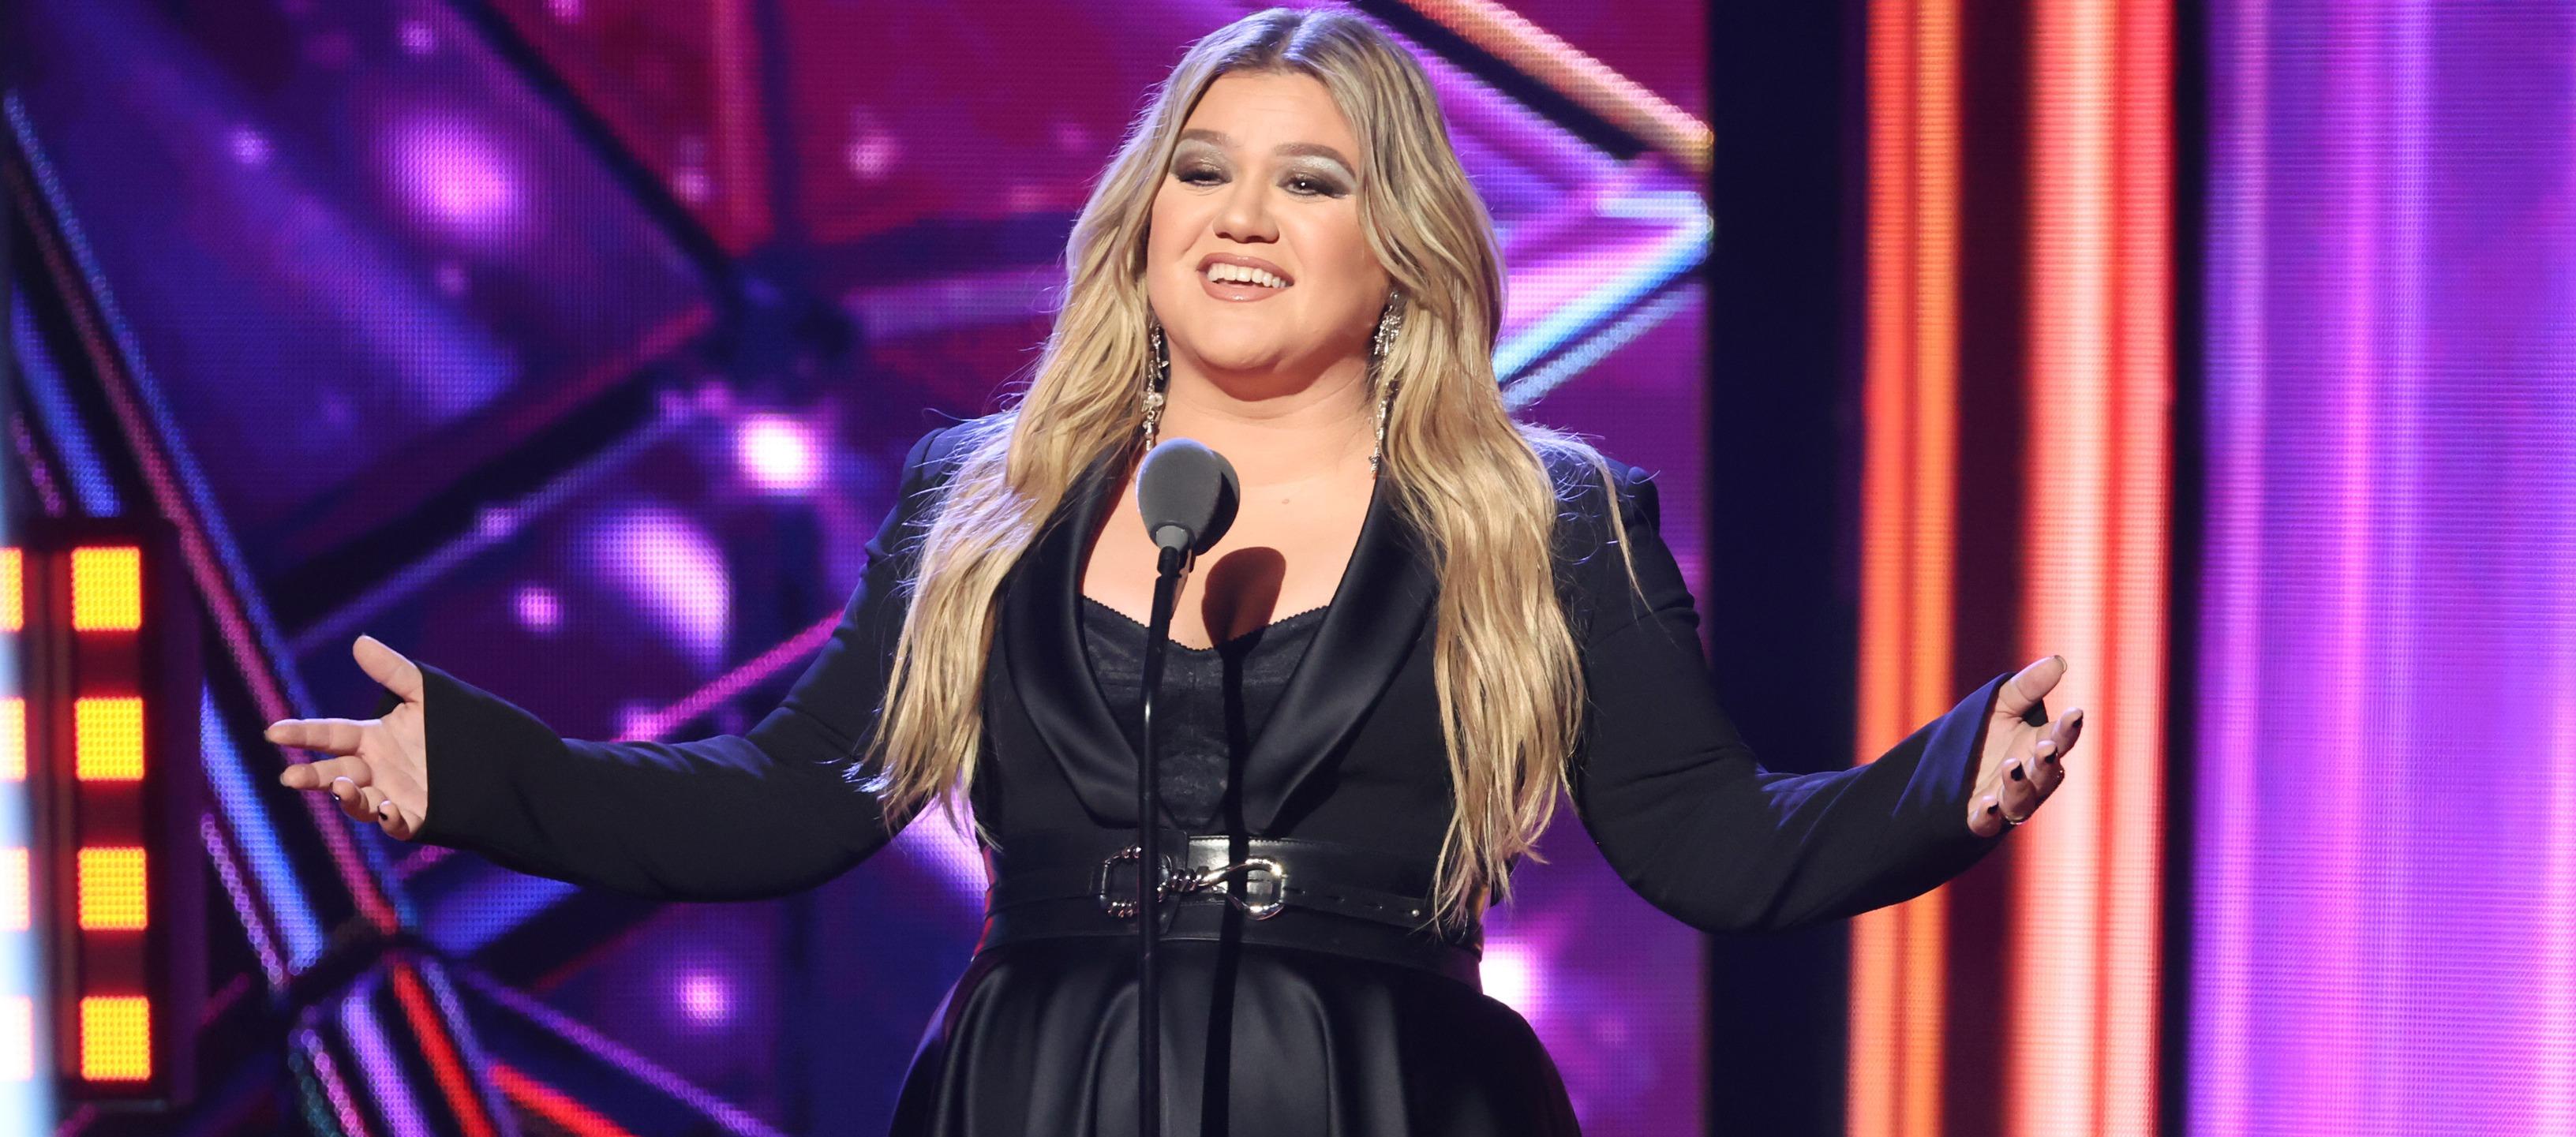 Kelly Clarkson on stage during the 2023 iHeartRadio Music Awards at the Dolby Theatre on March 27.